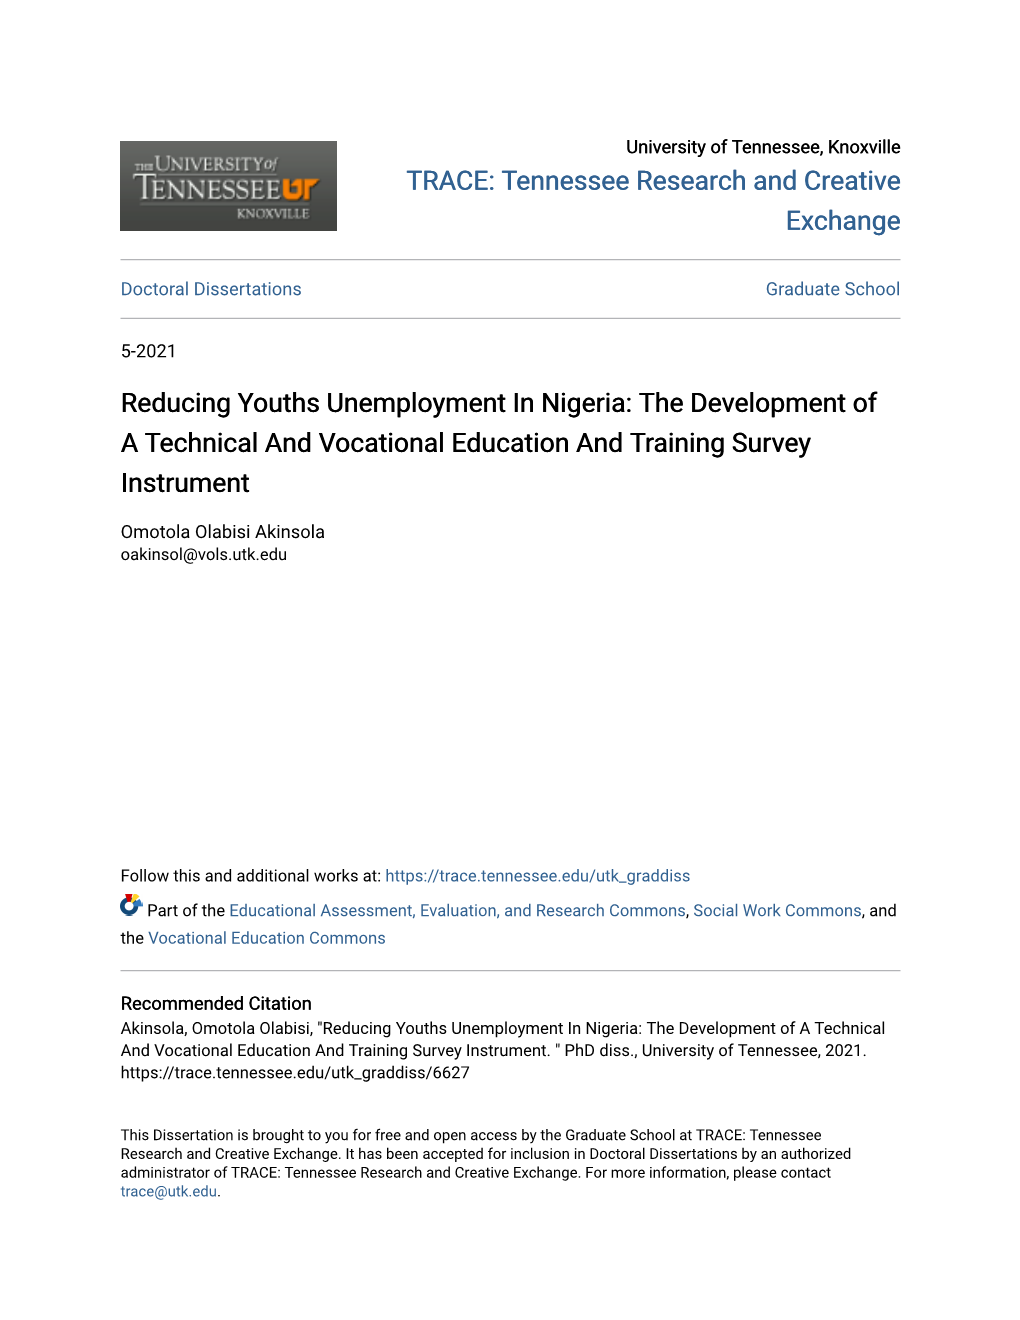 Reducing Youths Unemployment in Nigeria: the Development of a Technical and Vocational Education and Training Survey Instrument